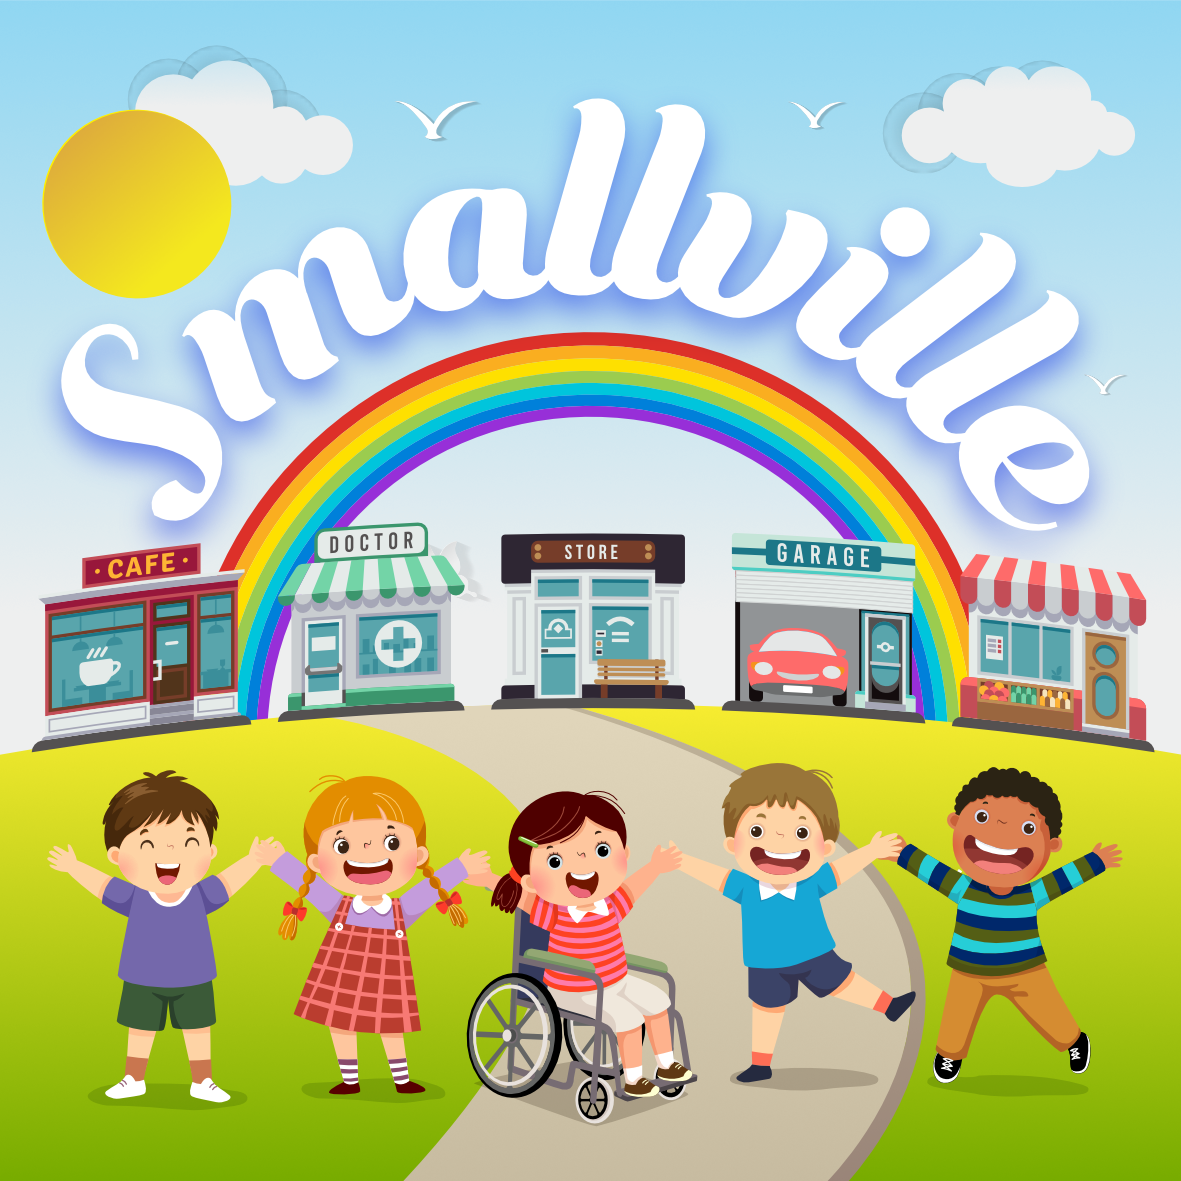 Smallville Roleplay 's logo